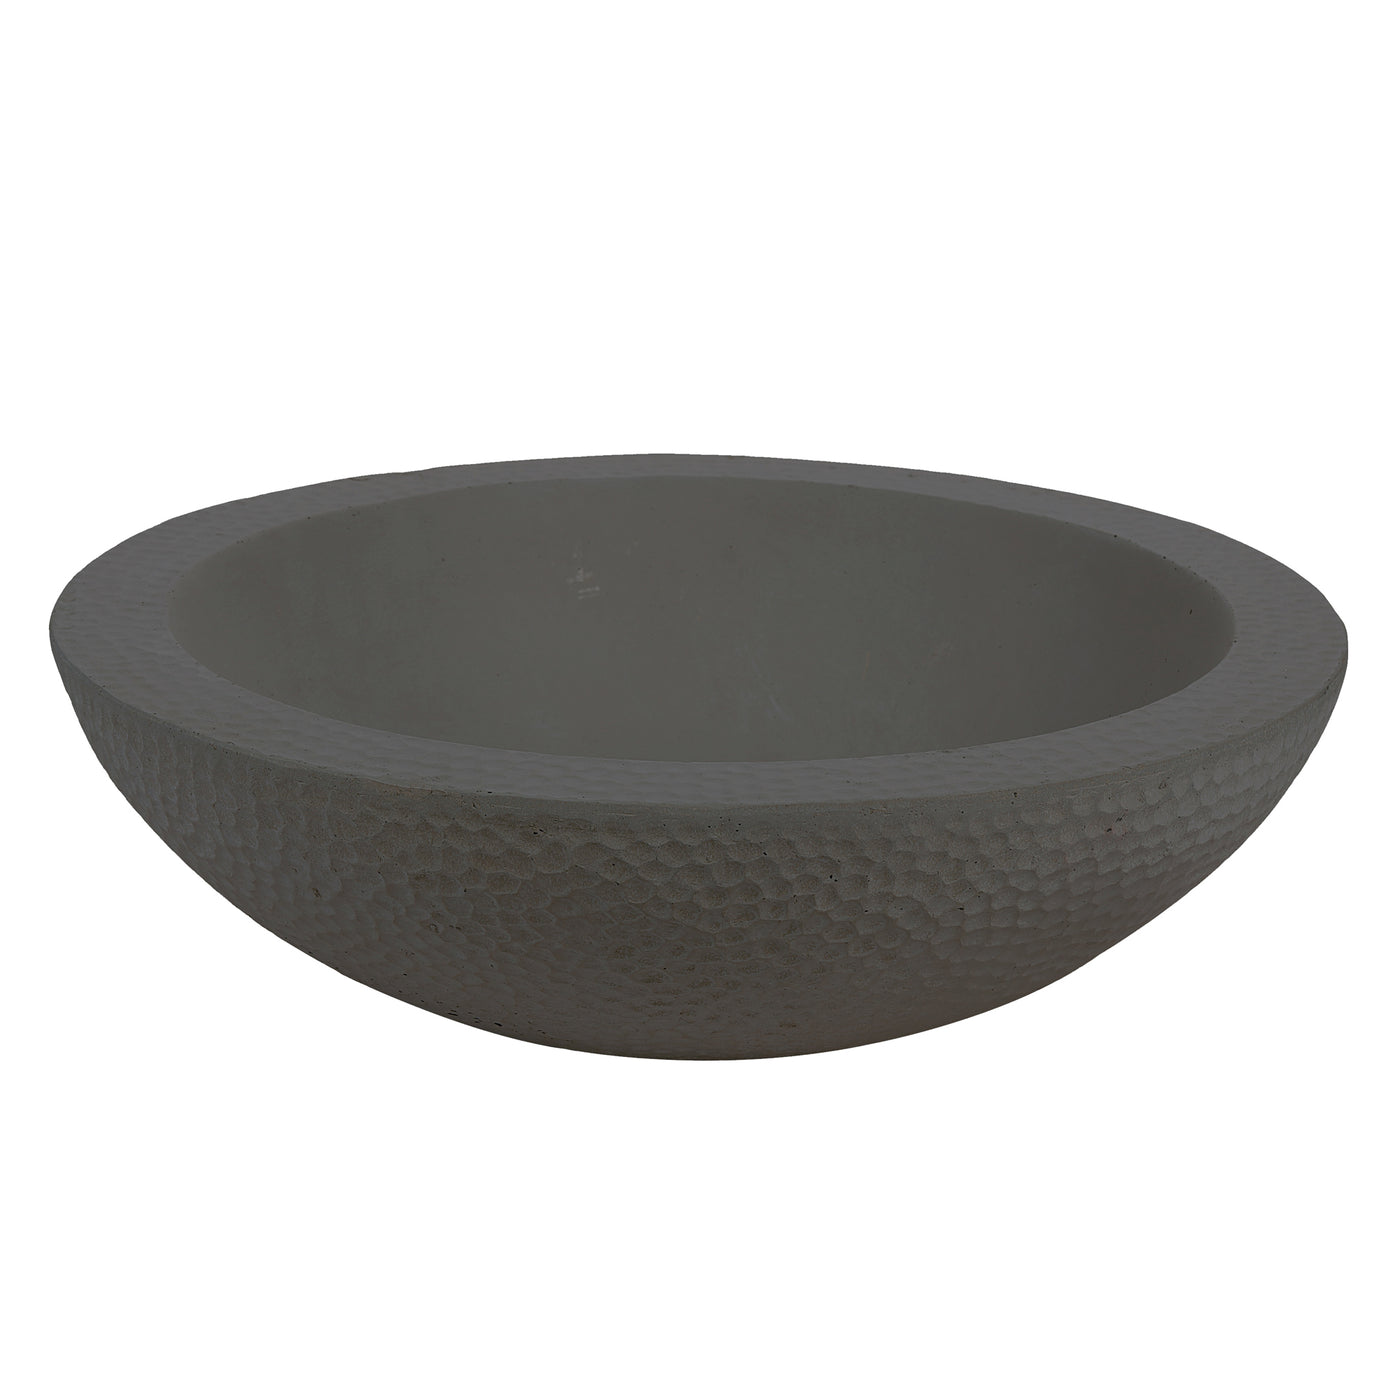 Handcrafted hammered-like stonecast low-profile bowl planter in charcoal dark gray